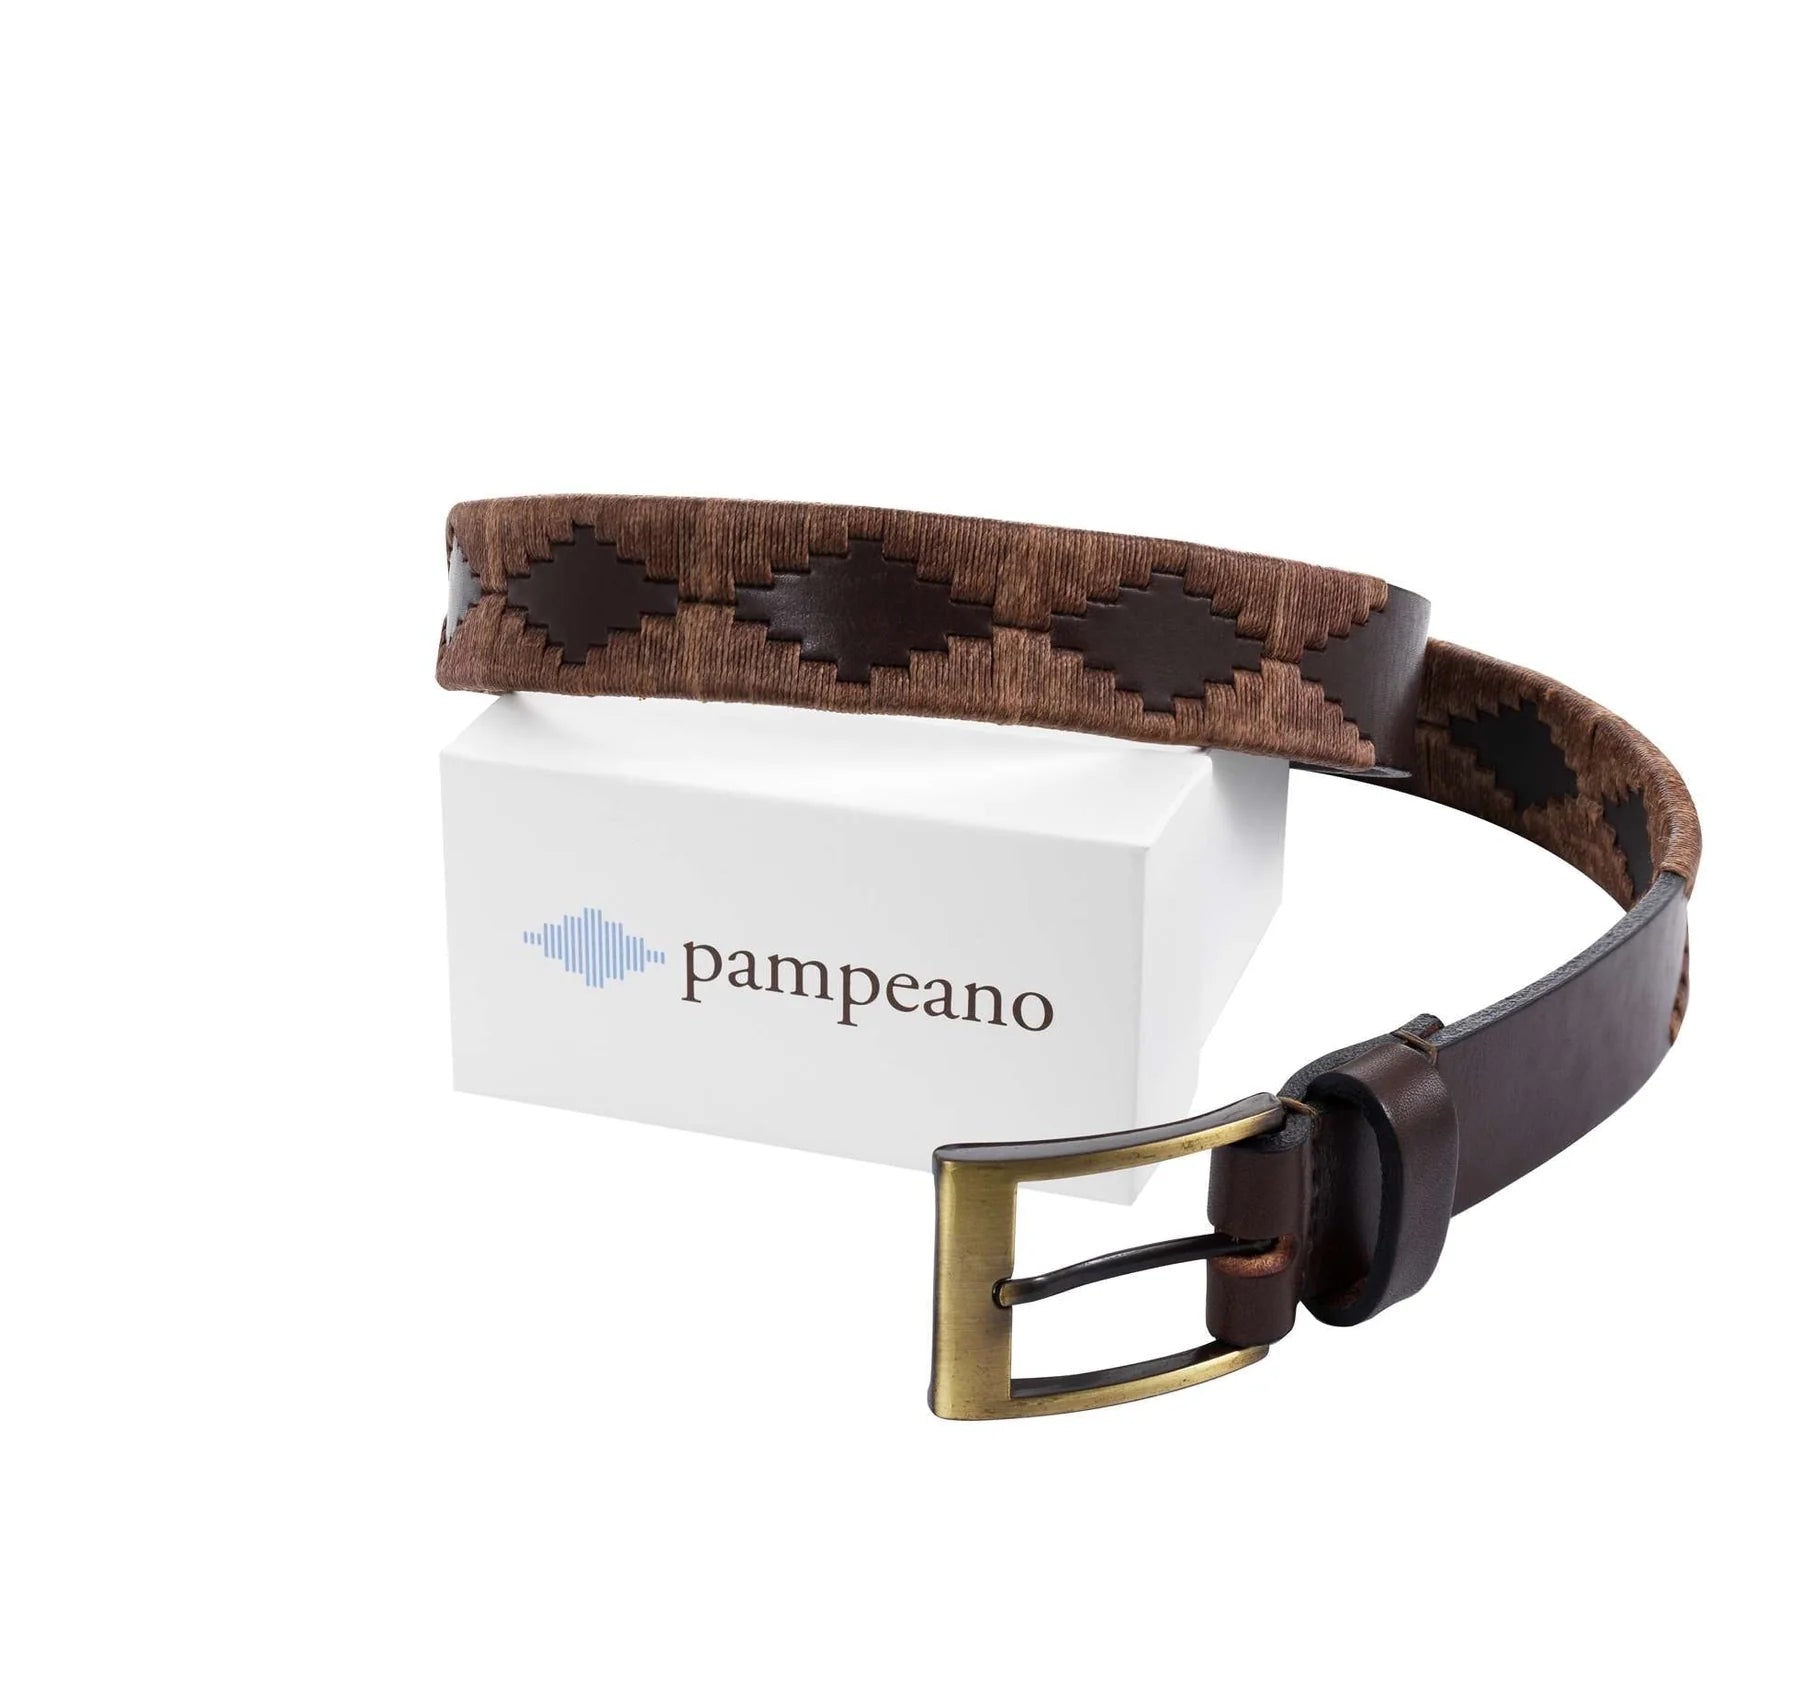 Pampeano Polo Leather Belt in Bordado Brown